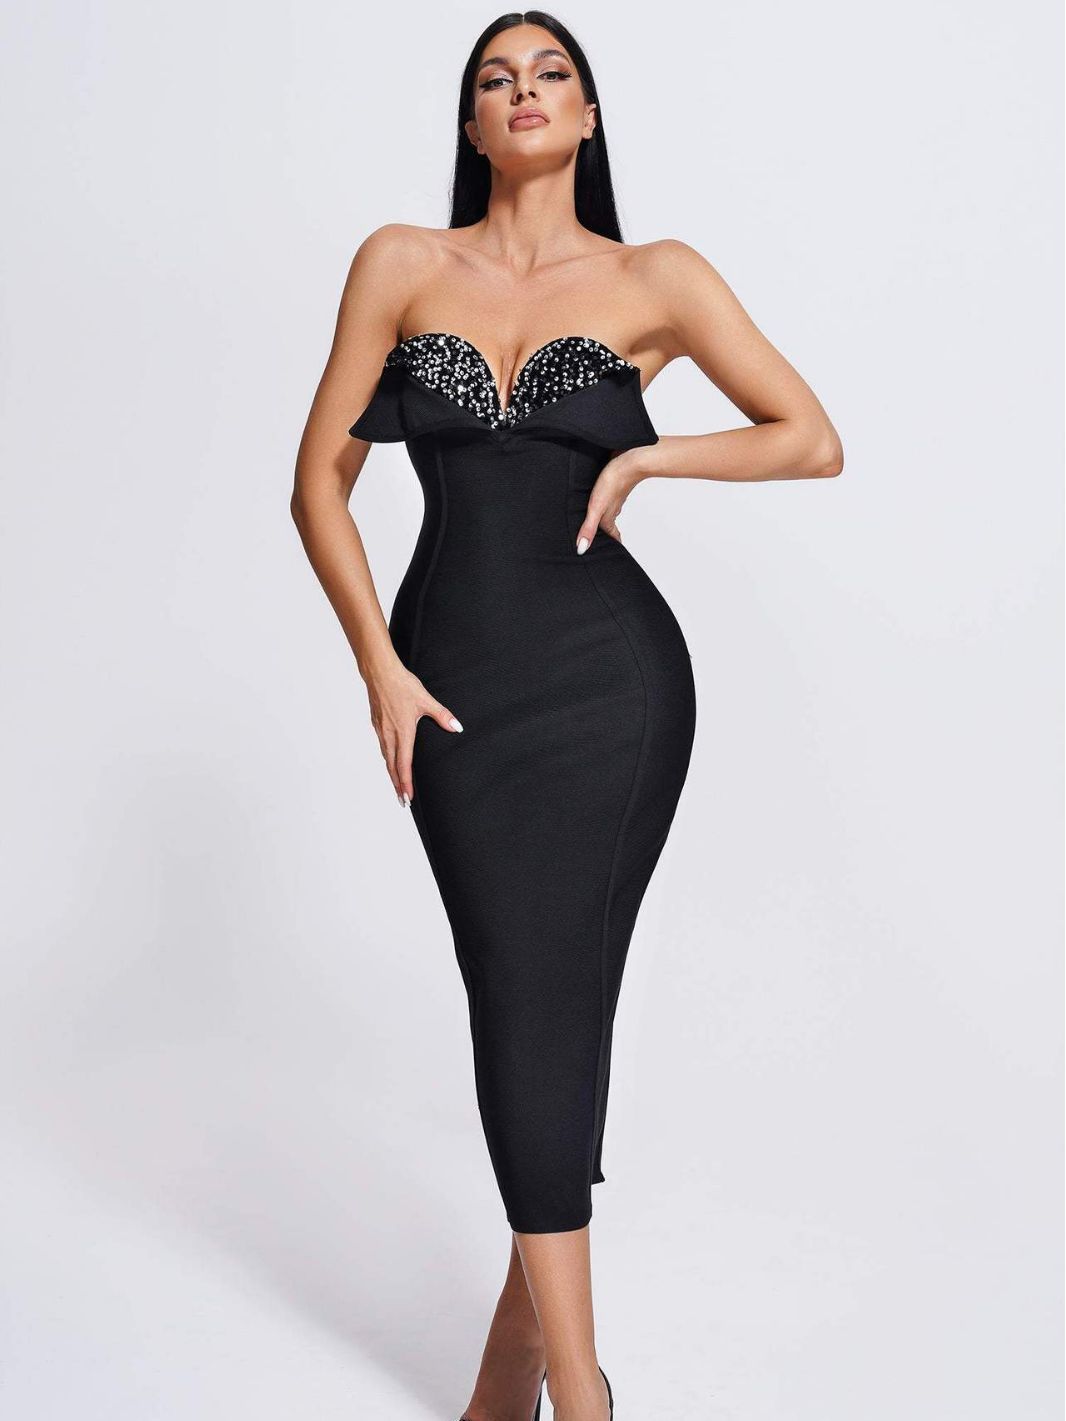 Women's Sequined Low Cut Strapless Black Bandage One-piece Dress Aclosy